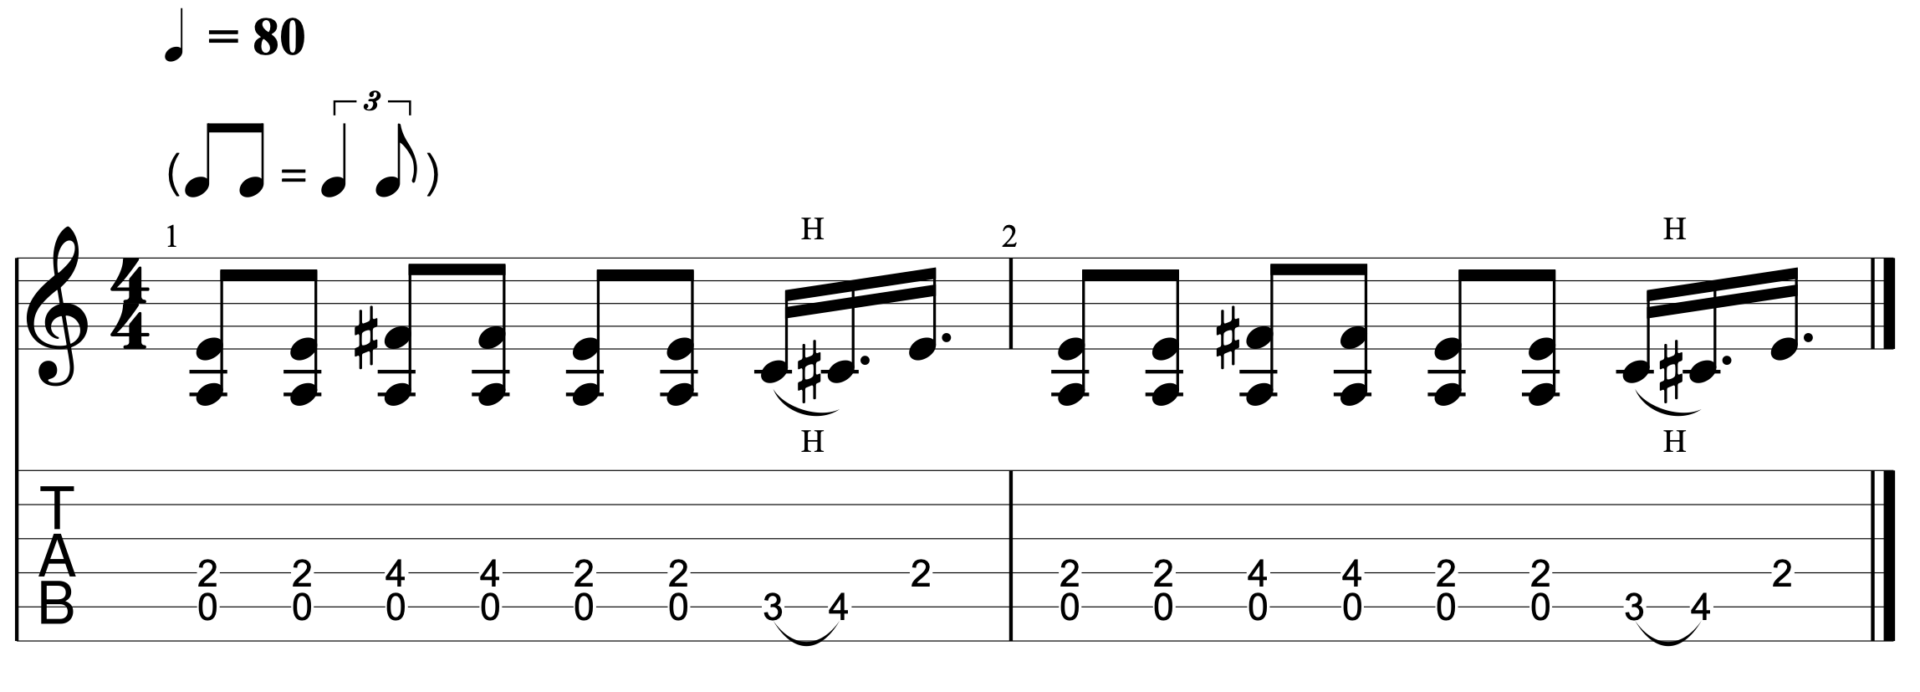 Adding fills when you play the blues shuffle is a great idea